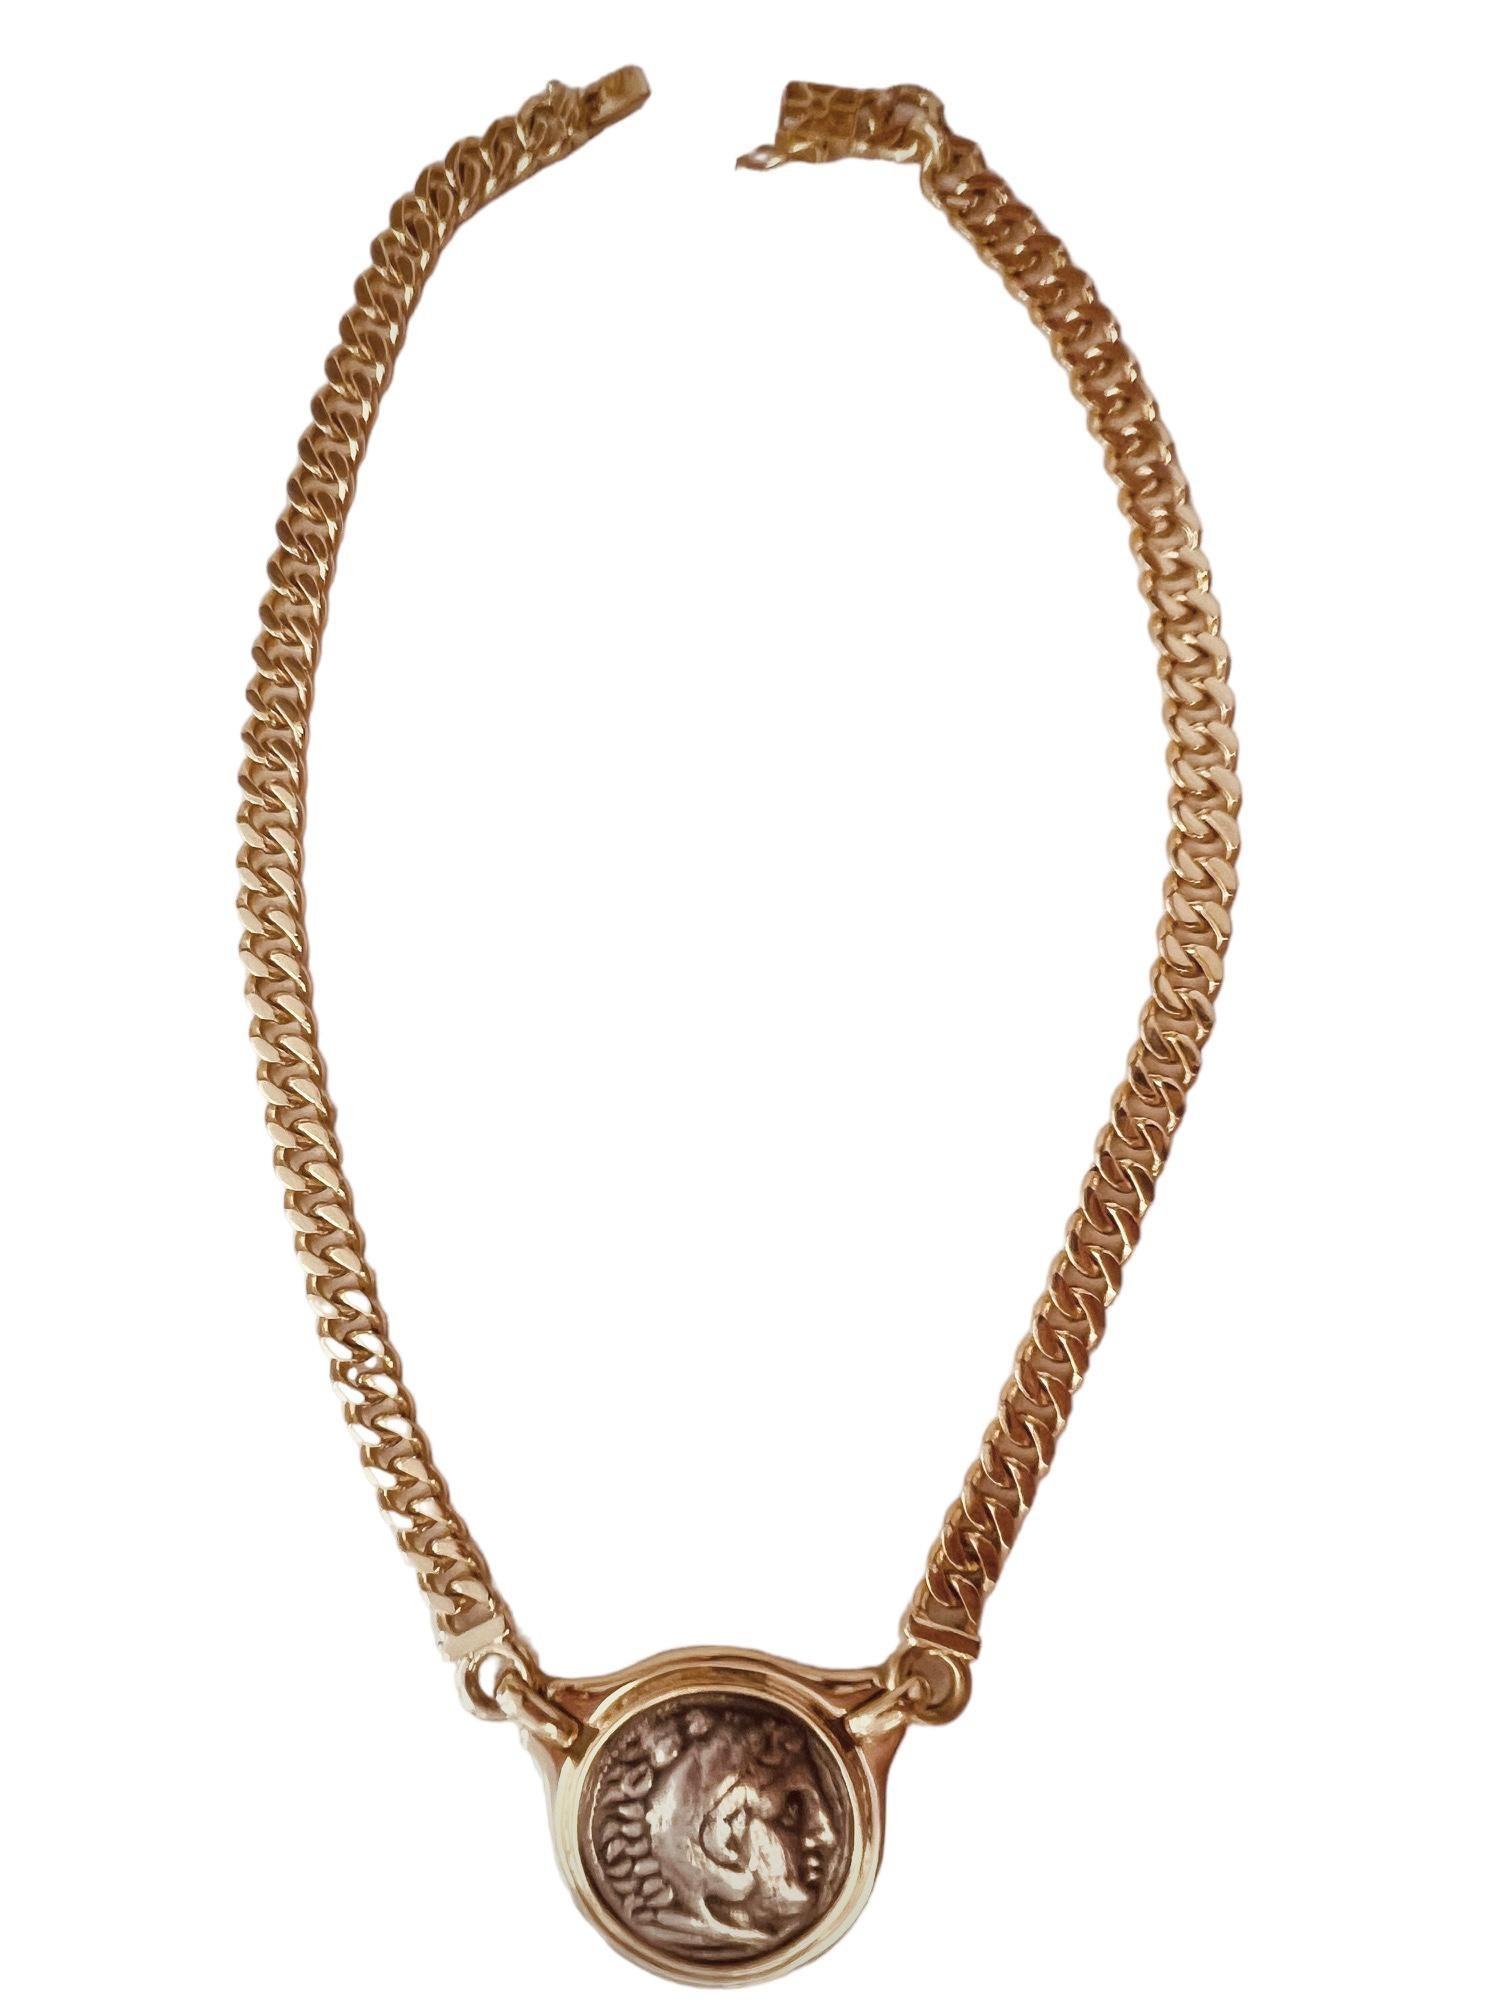 18ct Gold Link Necklace Centring A Reproduction Of An Antique Greek Silver Coin For Sale 9